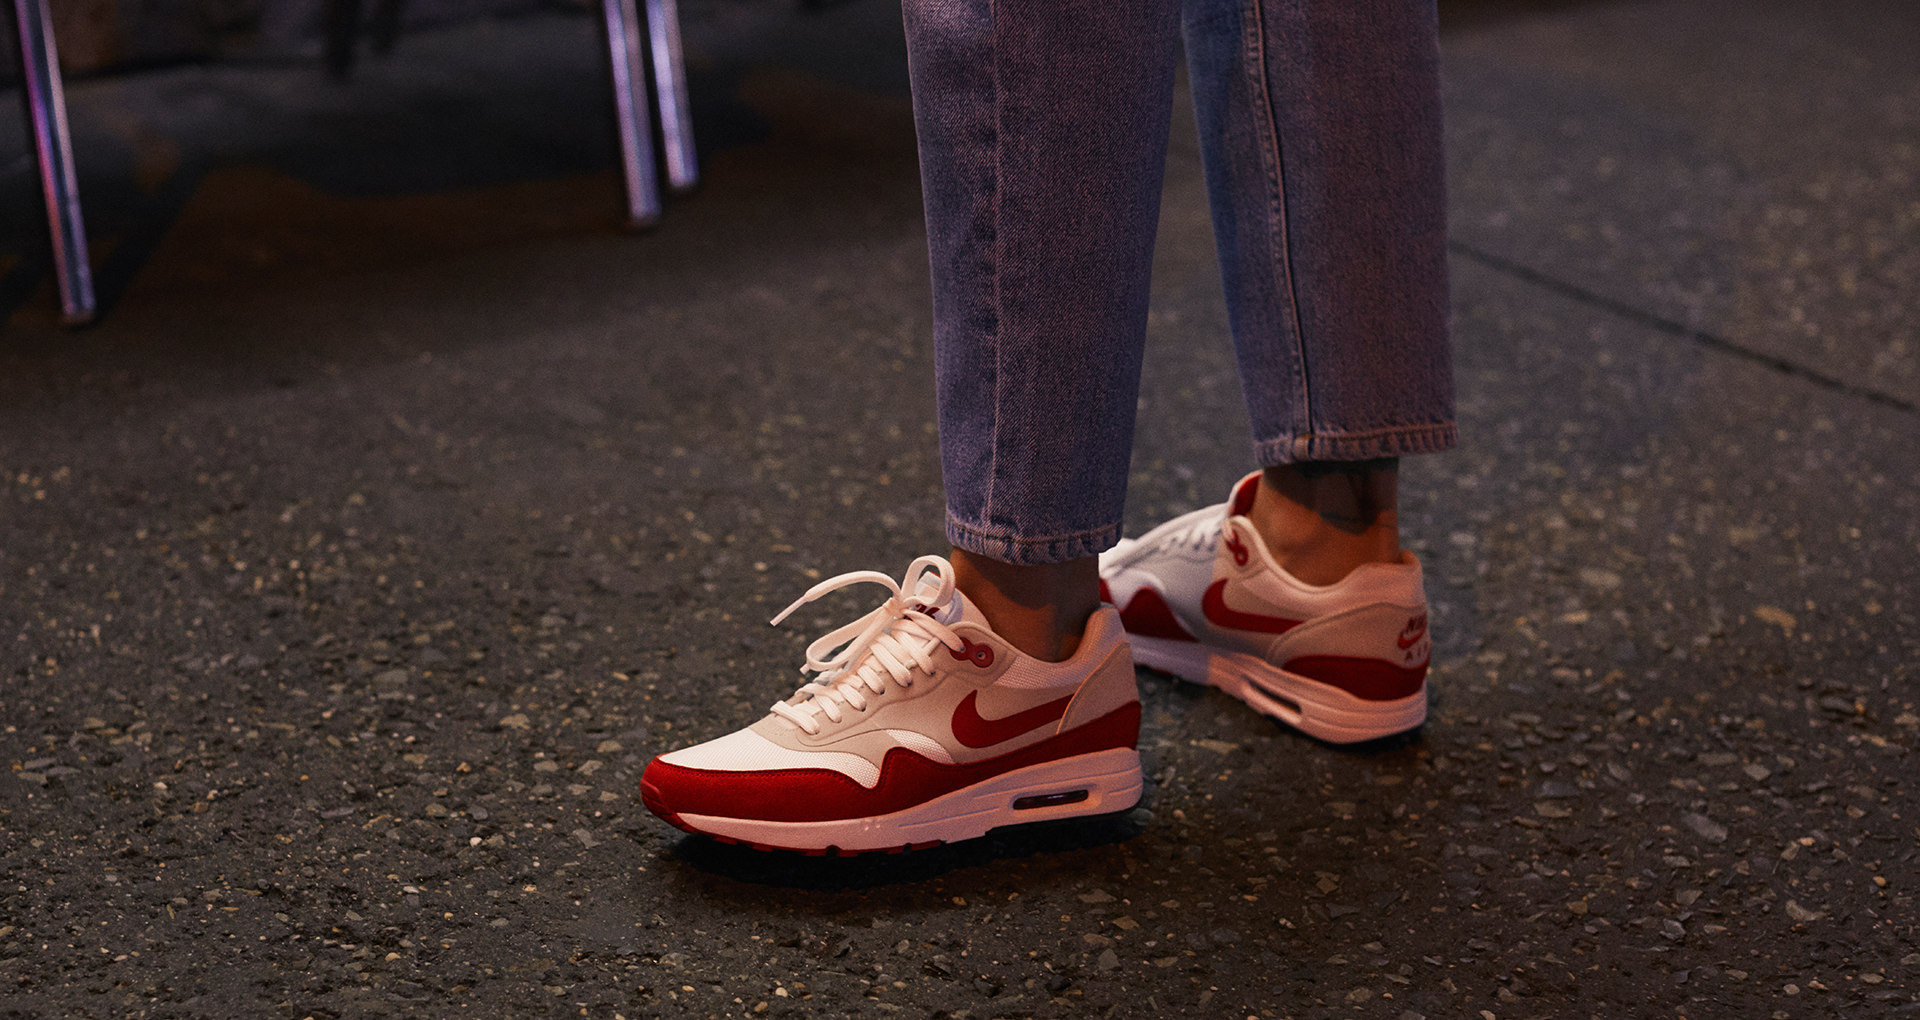 wmns-nike-air-max-1-ultra-2-0-university-red-1